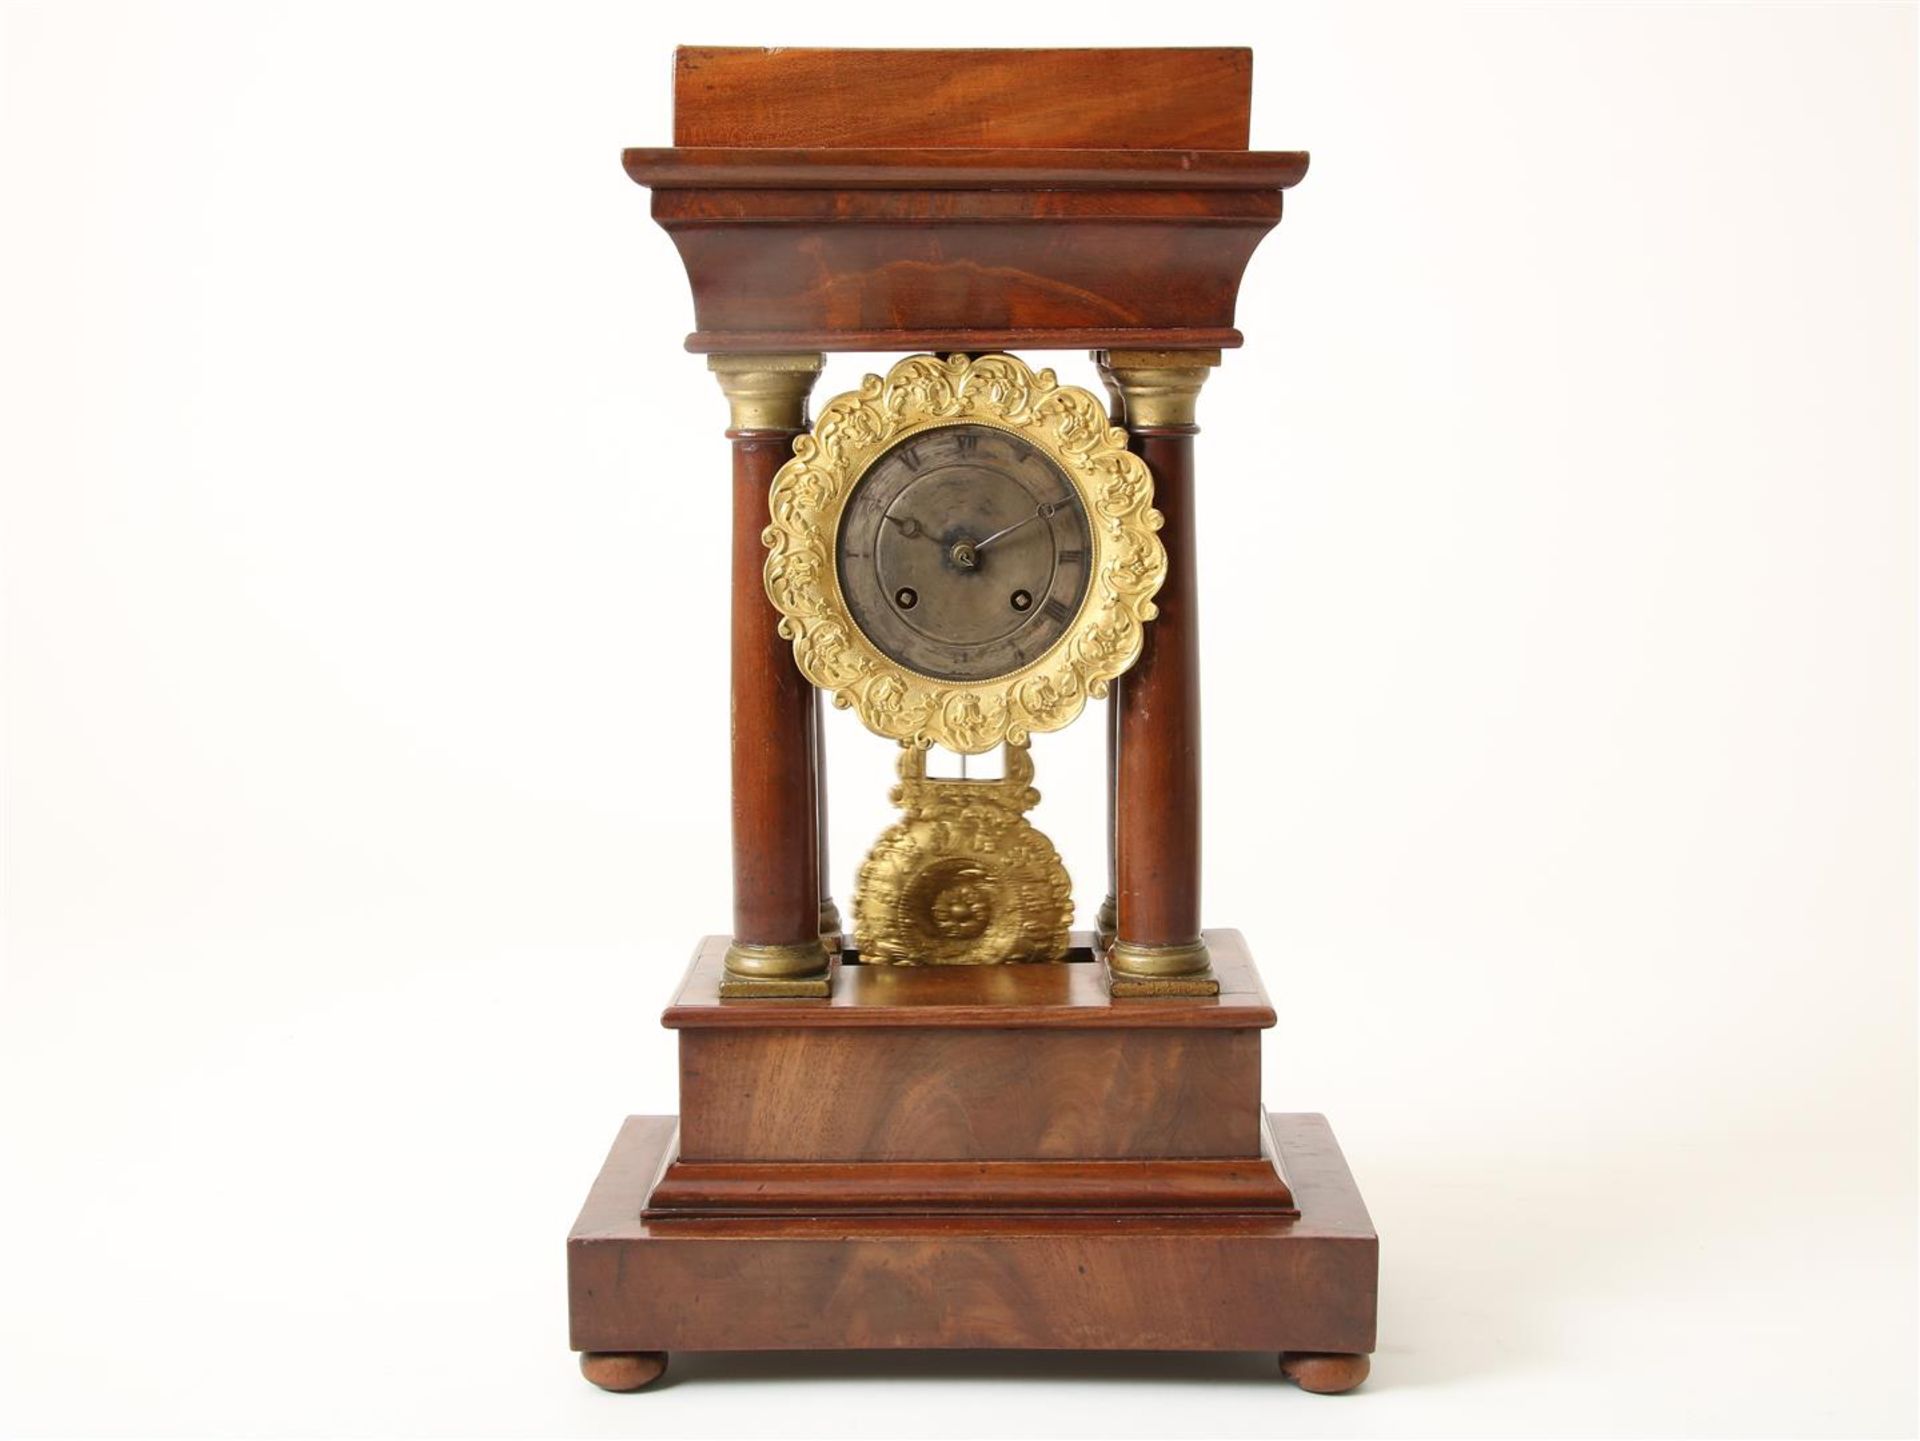 Empire column mantel clock with bronze dial in mahogany case, 19th century, height 41 cm.